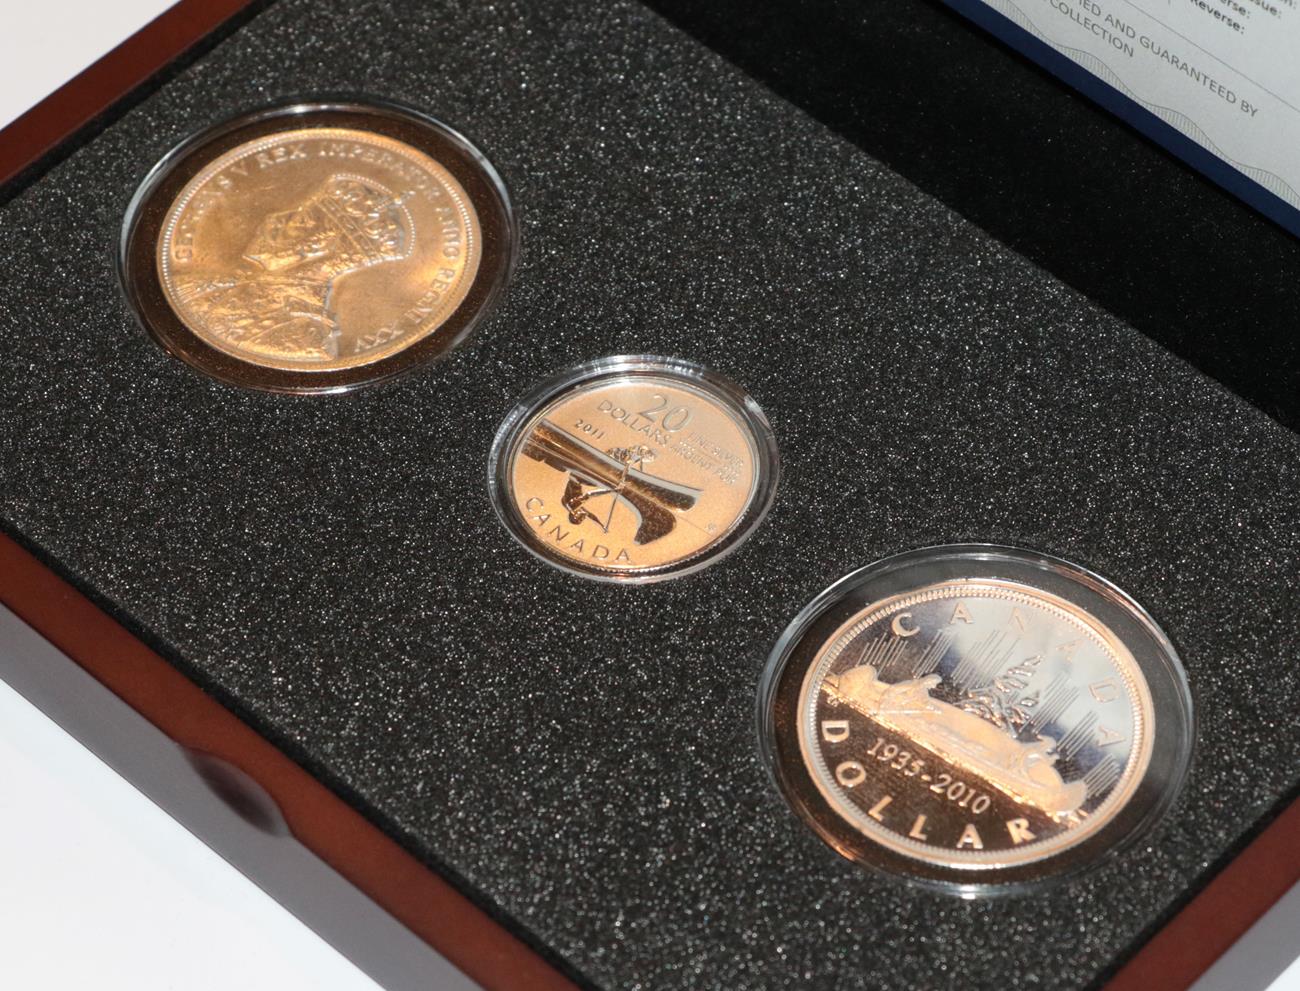 Lot 41 - Canada, Silver 'Voyageur' Set, a 3-coin set commemorating the iconic 'voyageur' silver dollar first